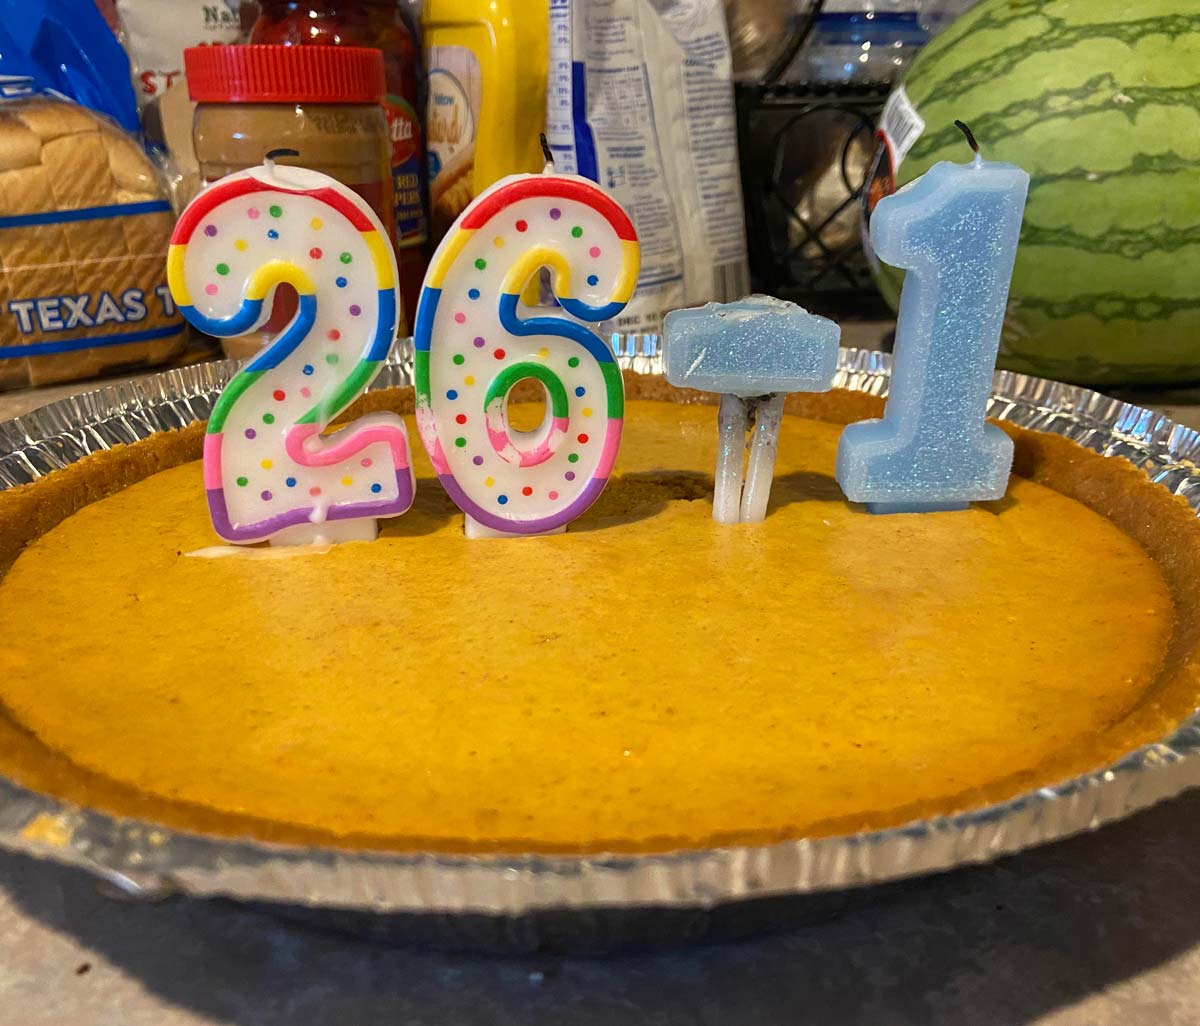 Couldn’t find a two and a five for my daughter’s birthday cheesecake, had to improvise